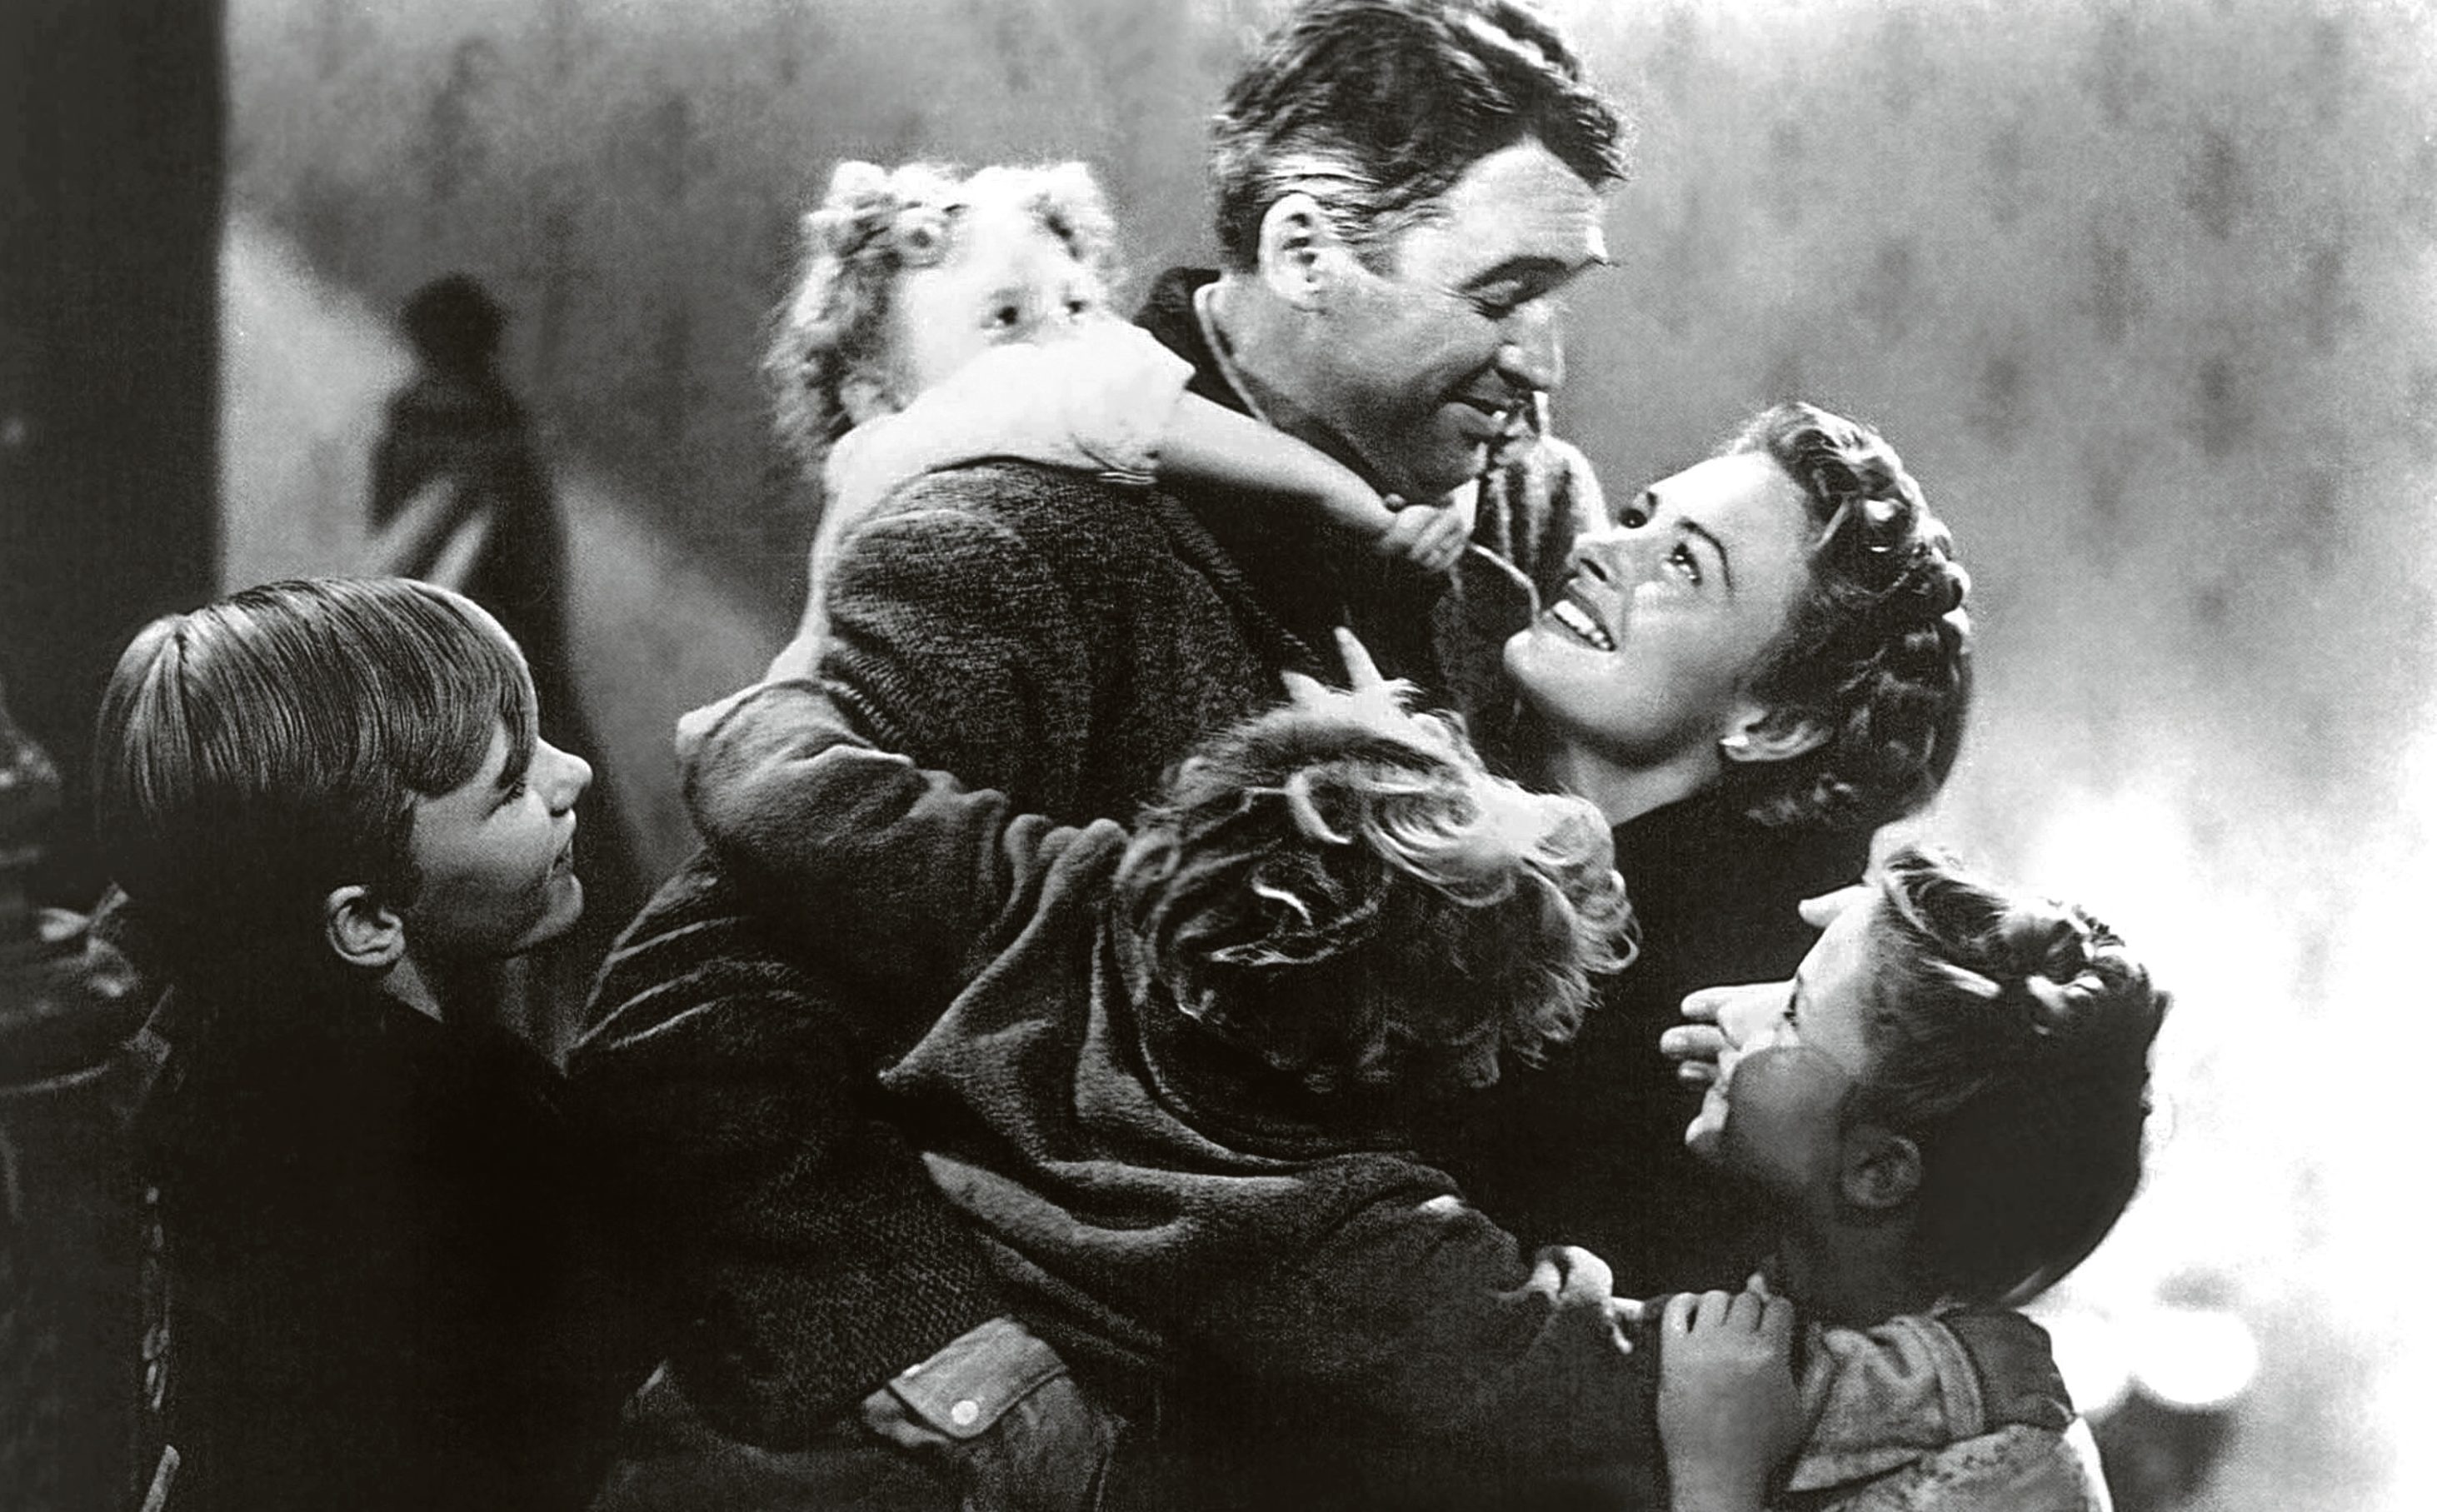 James Stewart and Donna Reed in It's a Wonderful Life
(Allstar/RKO)